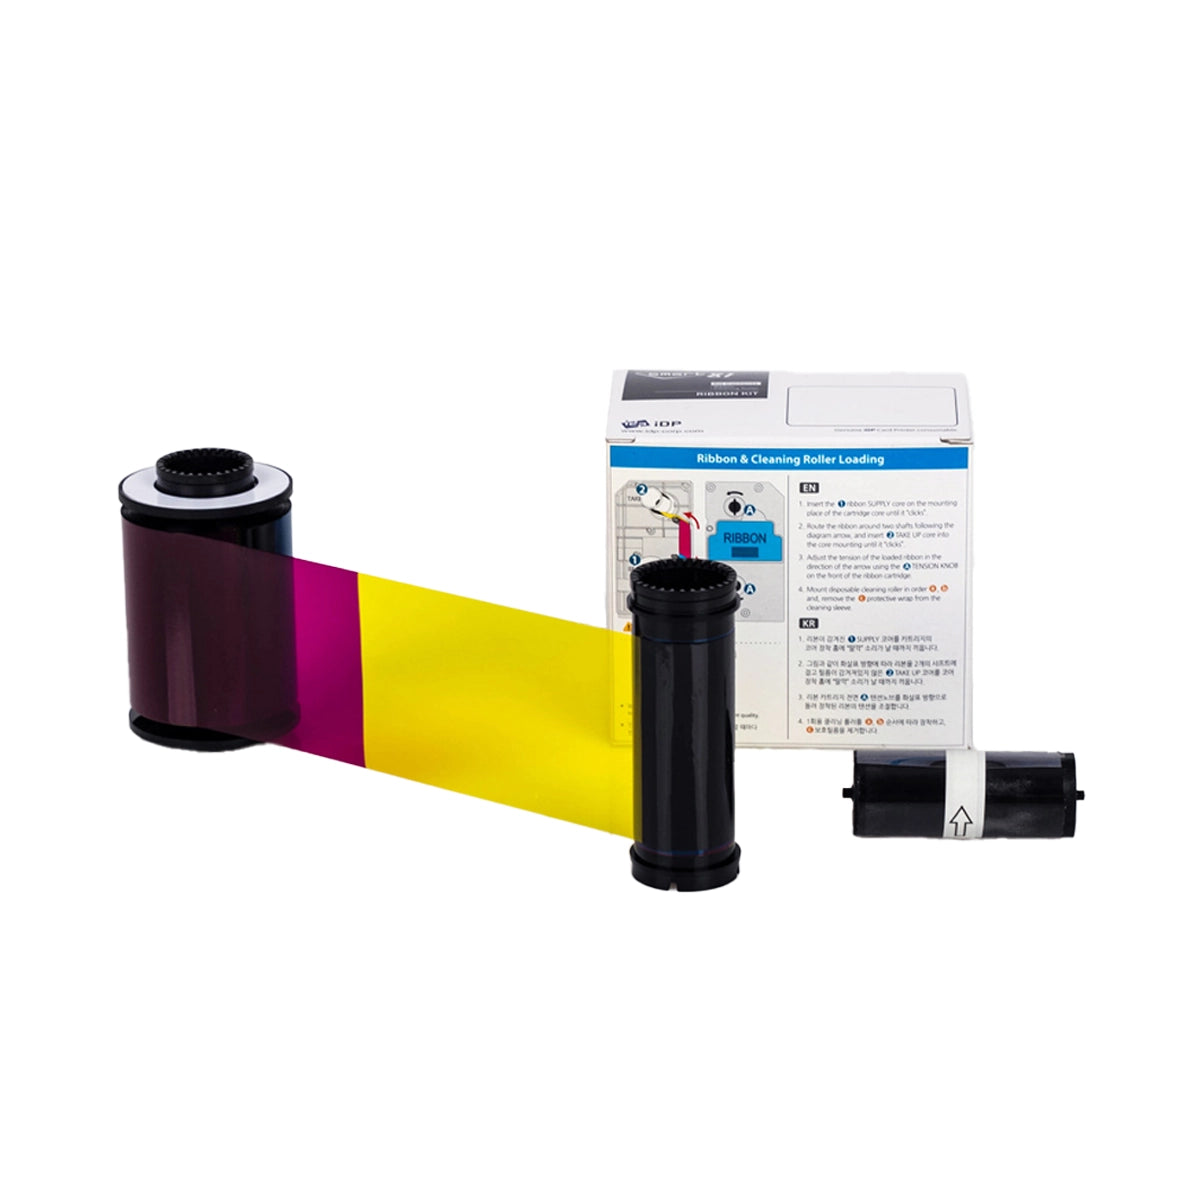 Color ribbon cartridge and cleaning roller displayed in front of an instruction box. The IDP 659896 YMCK Color Ribbon for Smart-81 ID Card Printer (500 Prints) shows sections of black, yellow, and magenta, perfect for use with your Smart-81 ID card printer.